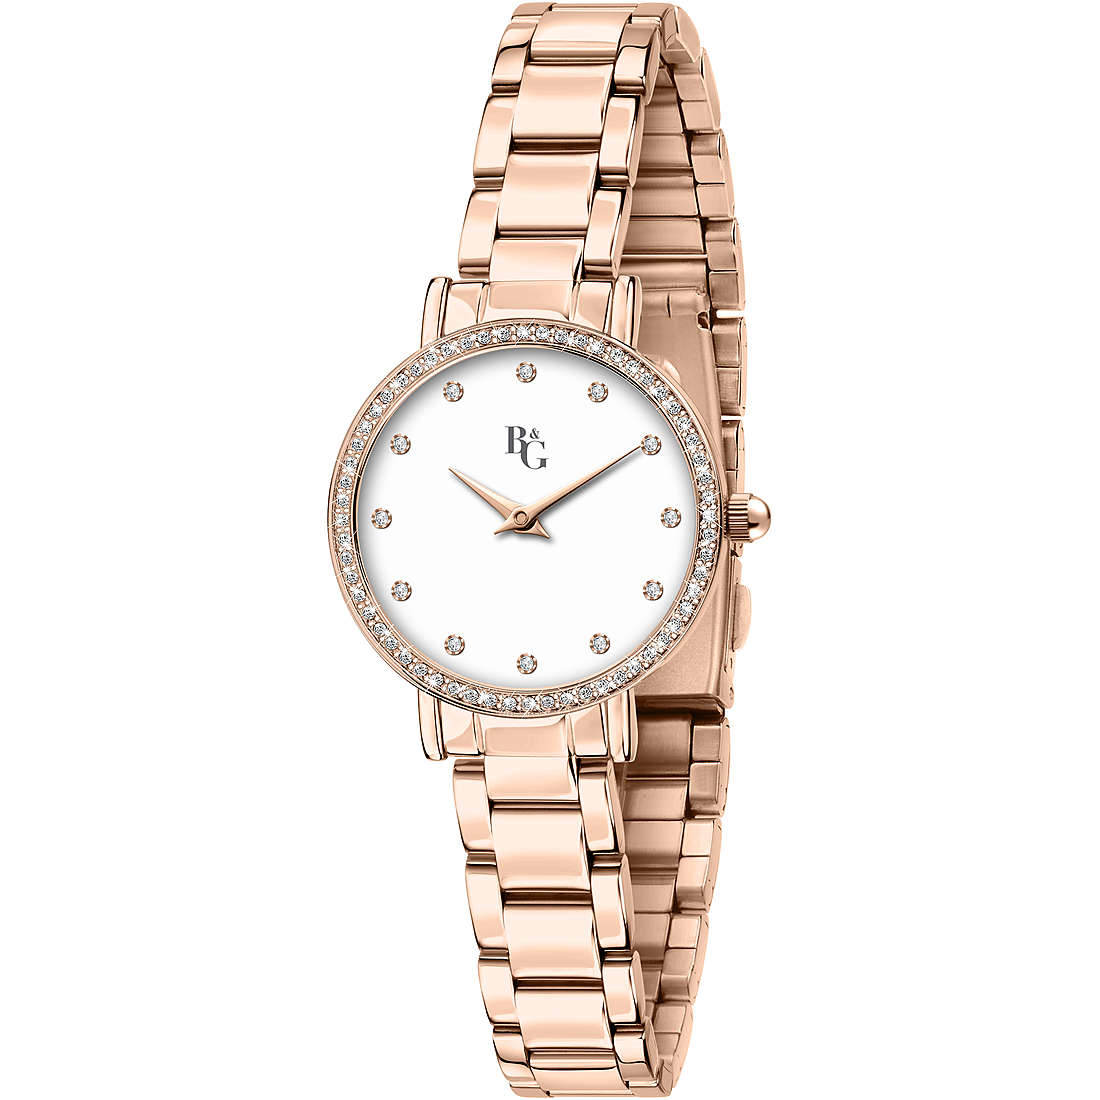 only time watch Metal White dial woman Preppy R3853252527